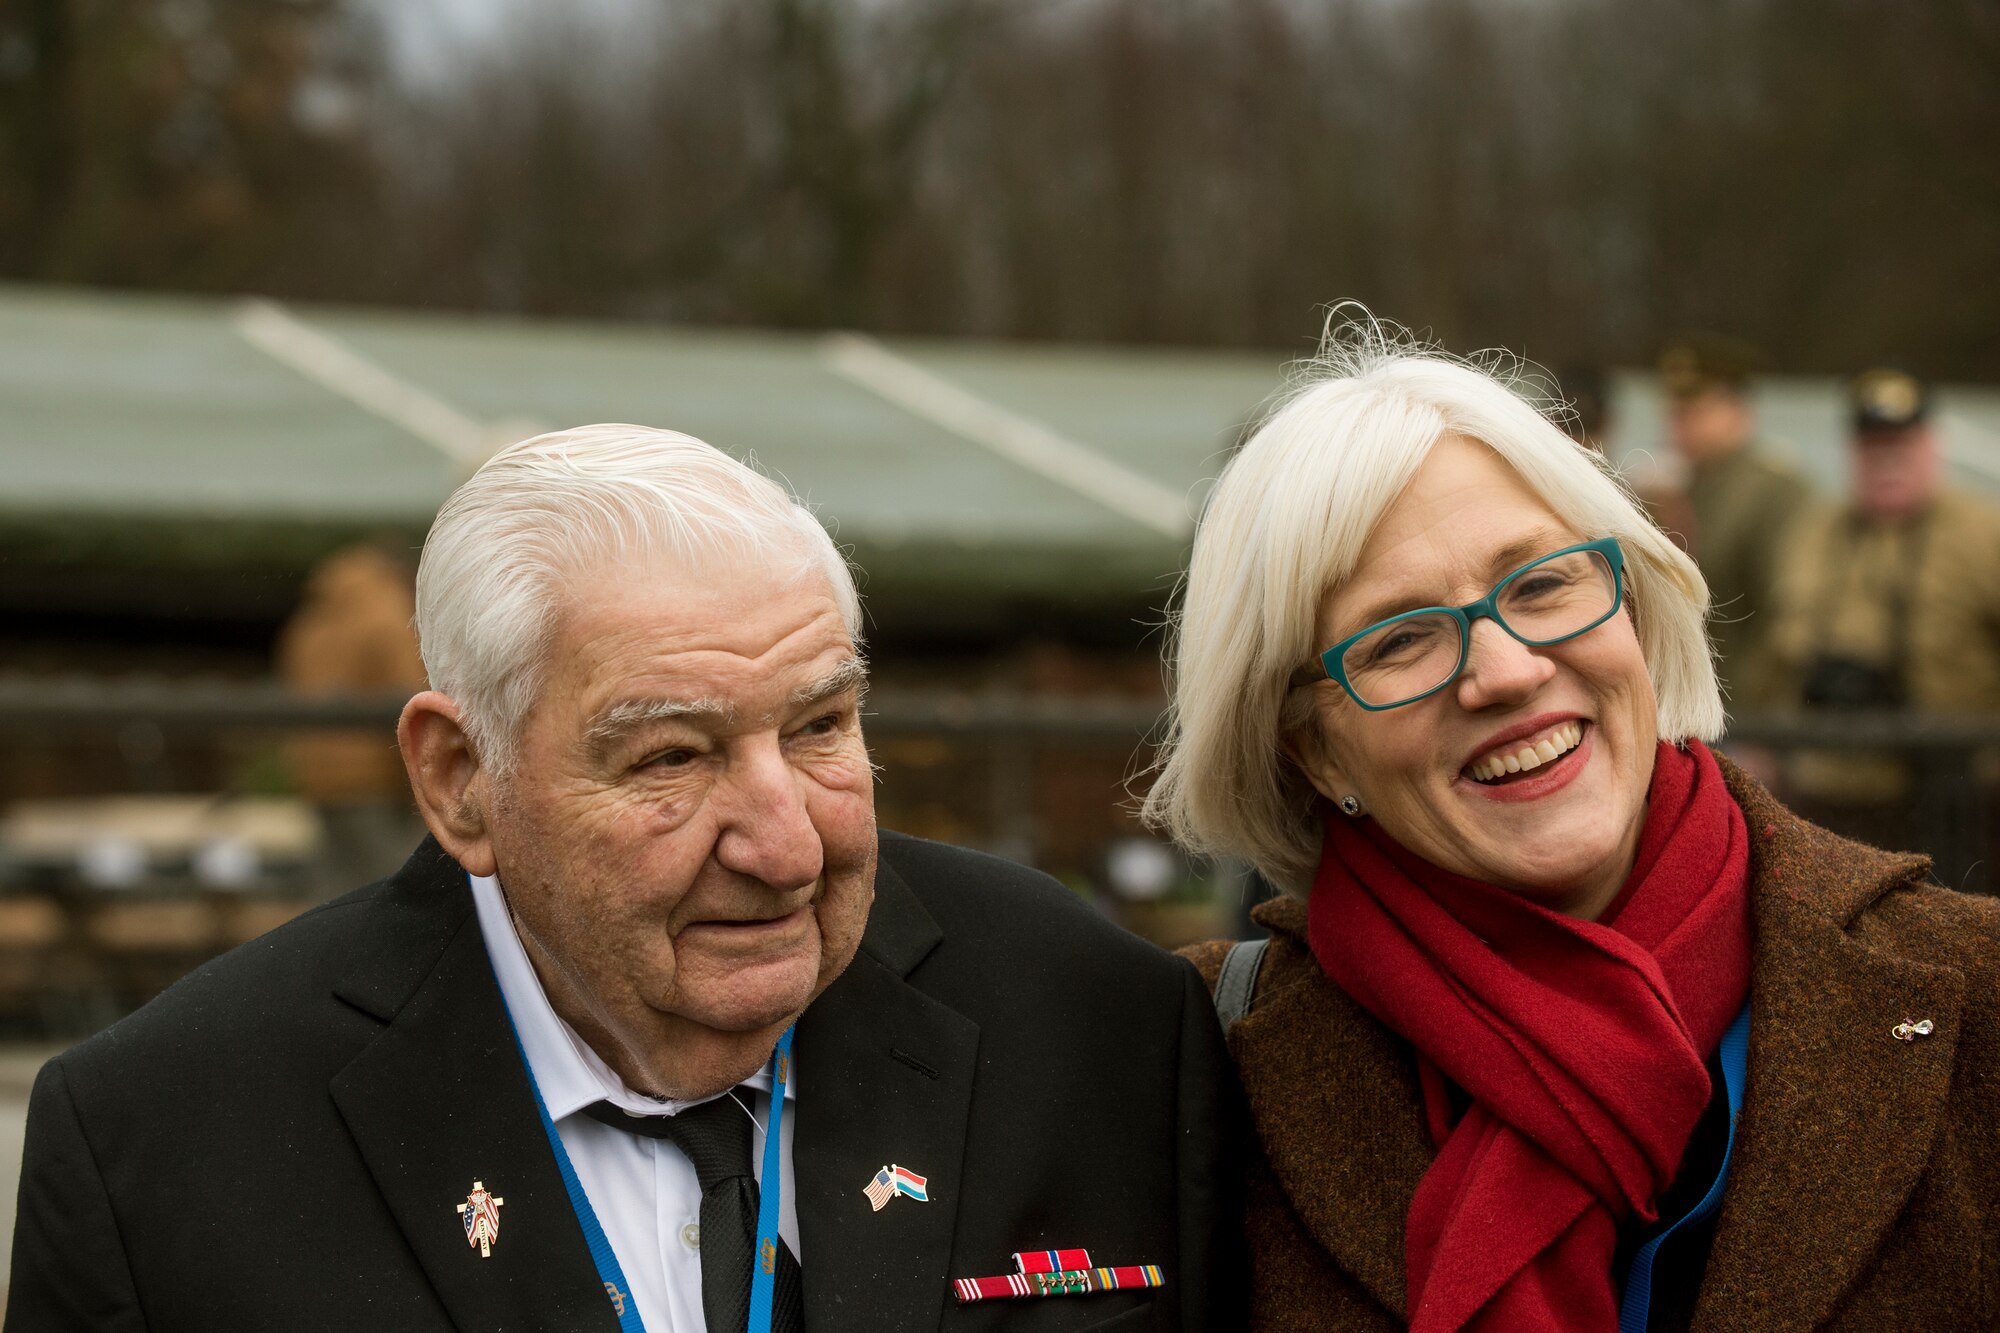 George Merz, a World War II veteran, and Helen Patton, granddaughter of U.S. Army Gen. George Patton, pose for a picture after a ceremony at Luxembourg American Cemetery  and Memorial Dec. 16, 2014, in Luxembourg. Merz and other World War II veterans and their families attended the ceremony as well as Battle of the Bulge-related sites throughout Belgium and Luxembourg. (U.S. Air Force photo by Senior Airman Rusty Frank/Released)